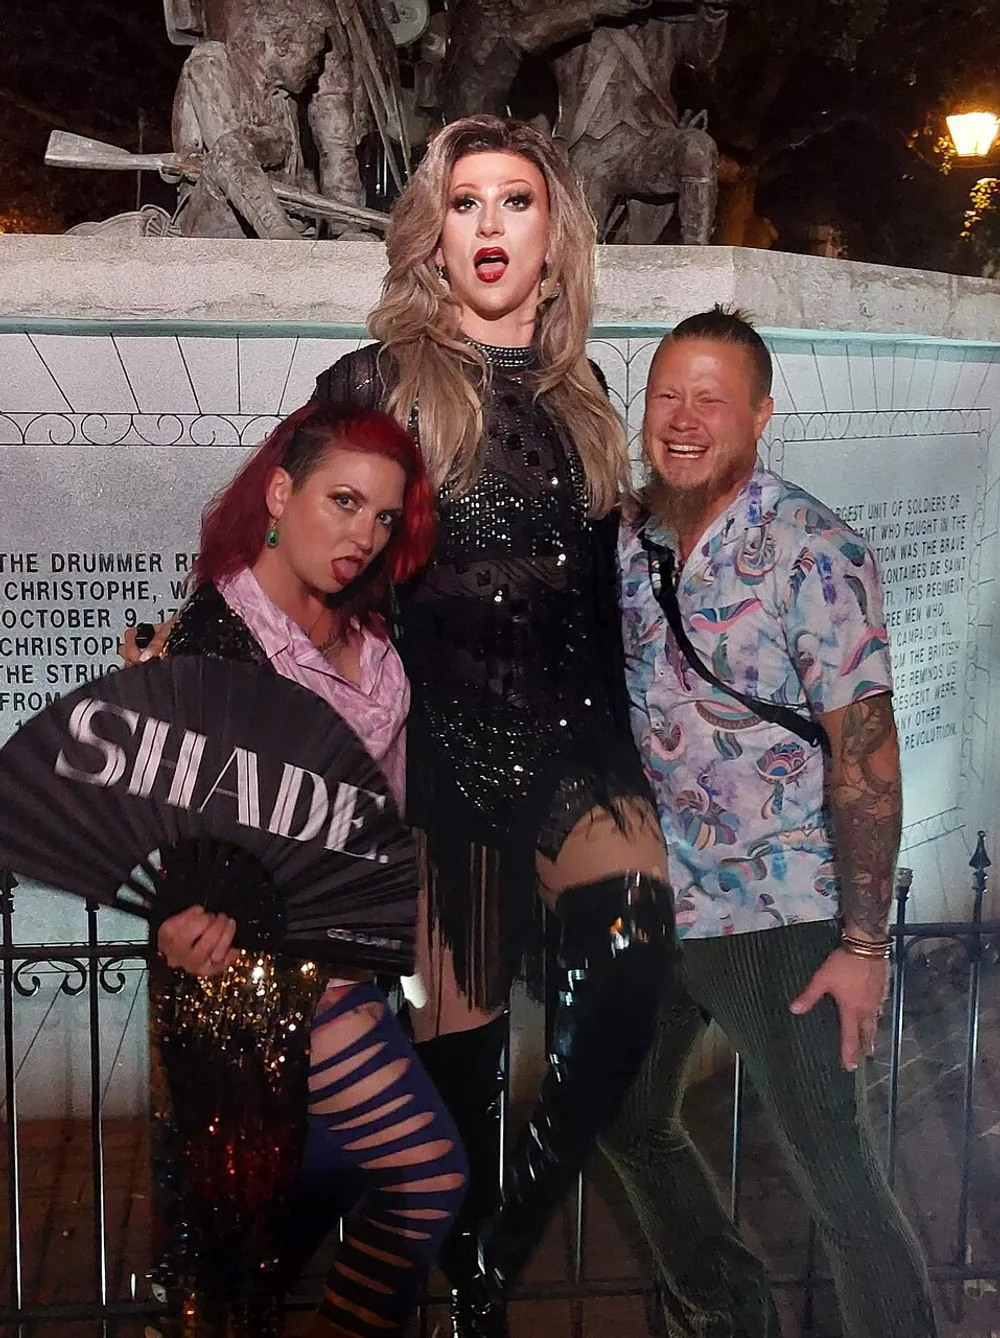 Three people are posing playfully at night with the central figure in elaborate drag attire and makeup while one holds a fan labeled SHADE and the other wears a patterned shirt in front of a sculpted memorial